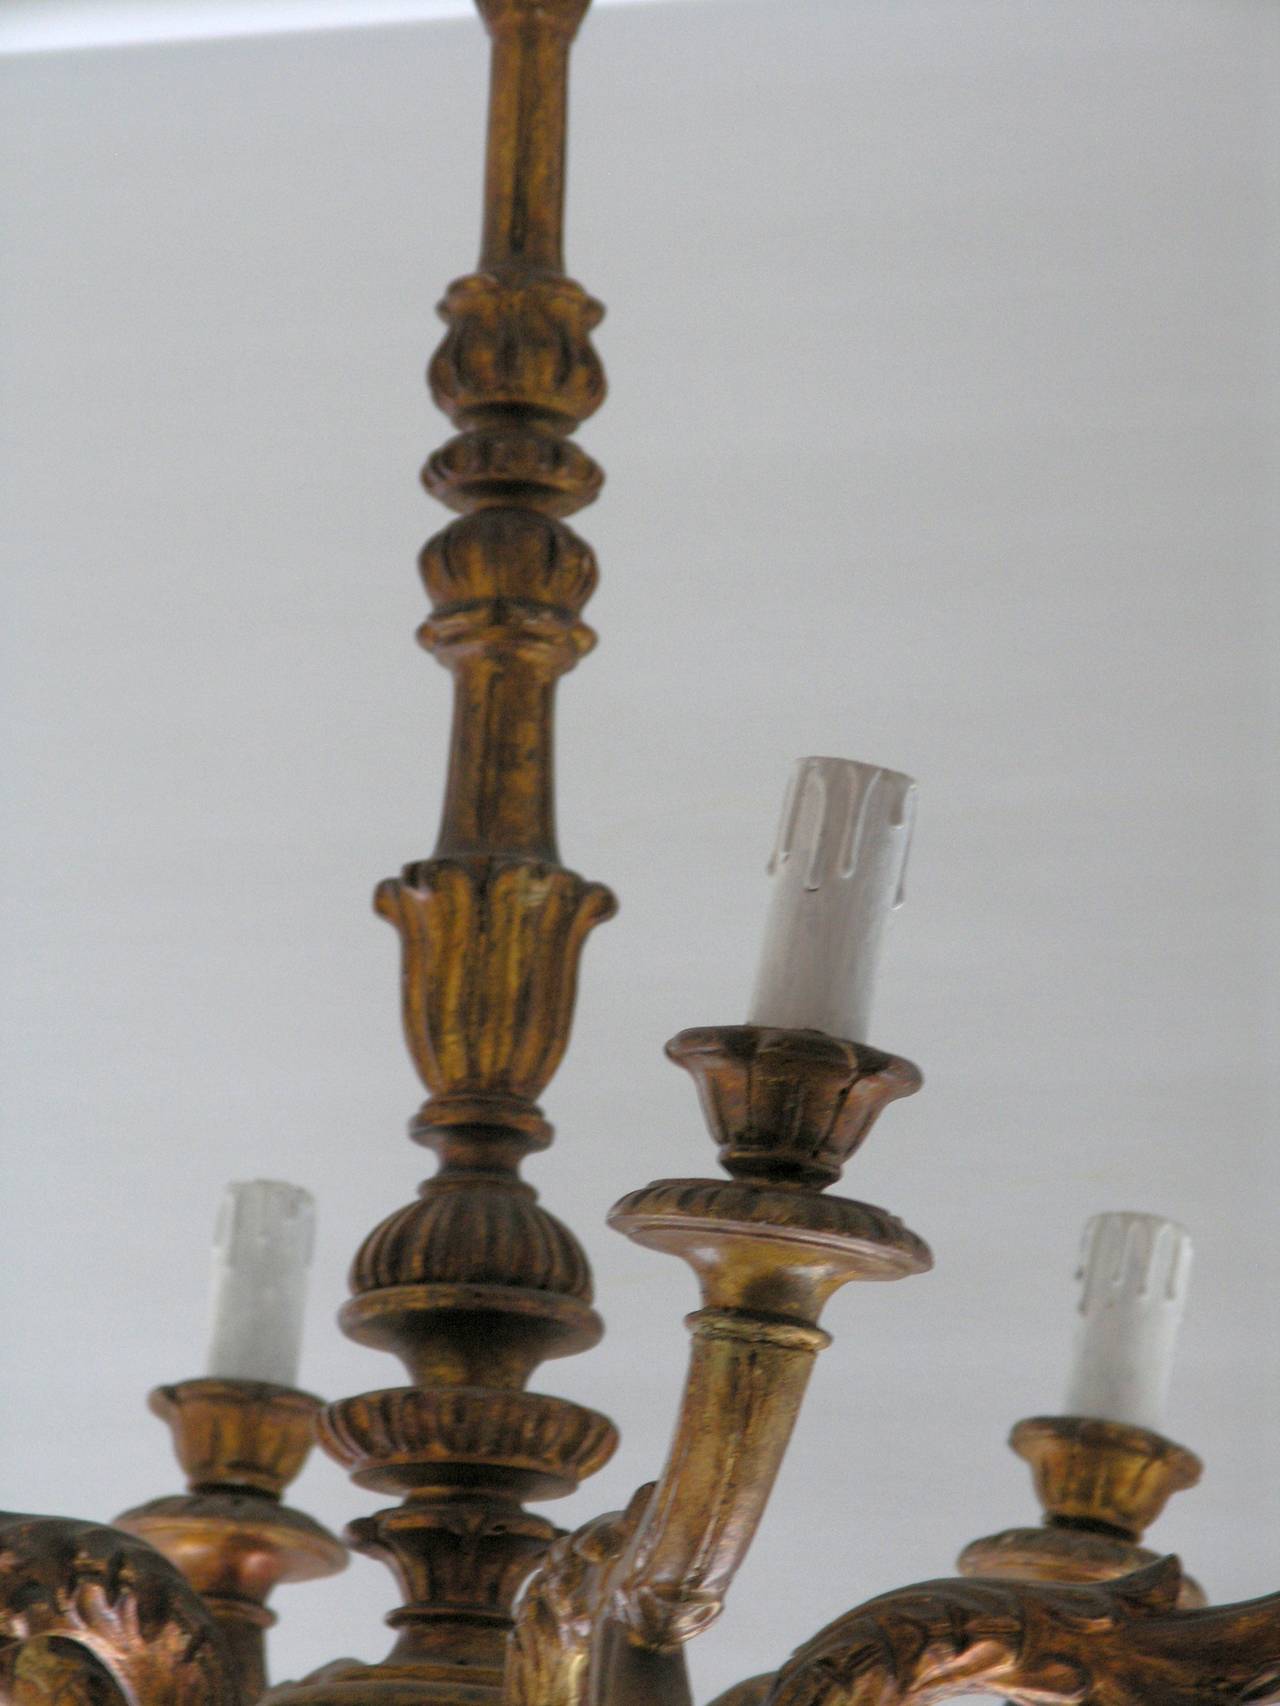 Turned vasiform fluted standard issuing a six-leaf carved candle arms with waisted above a lobed pendant.